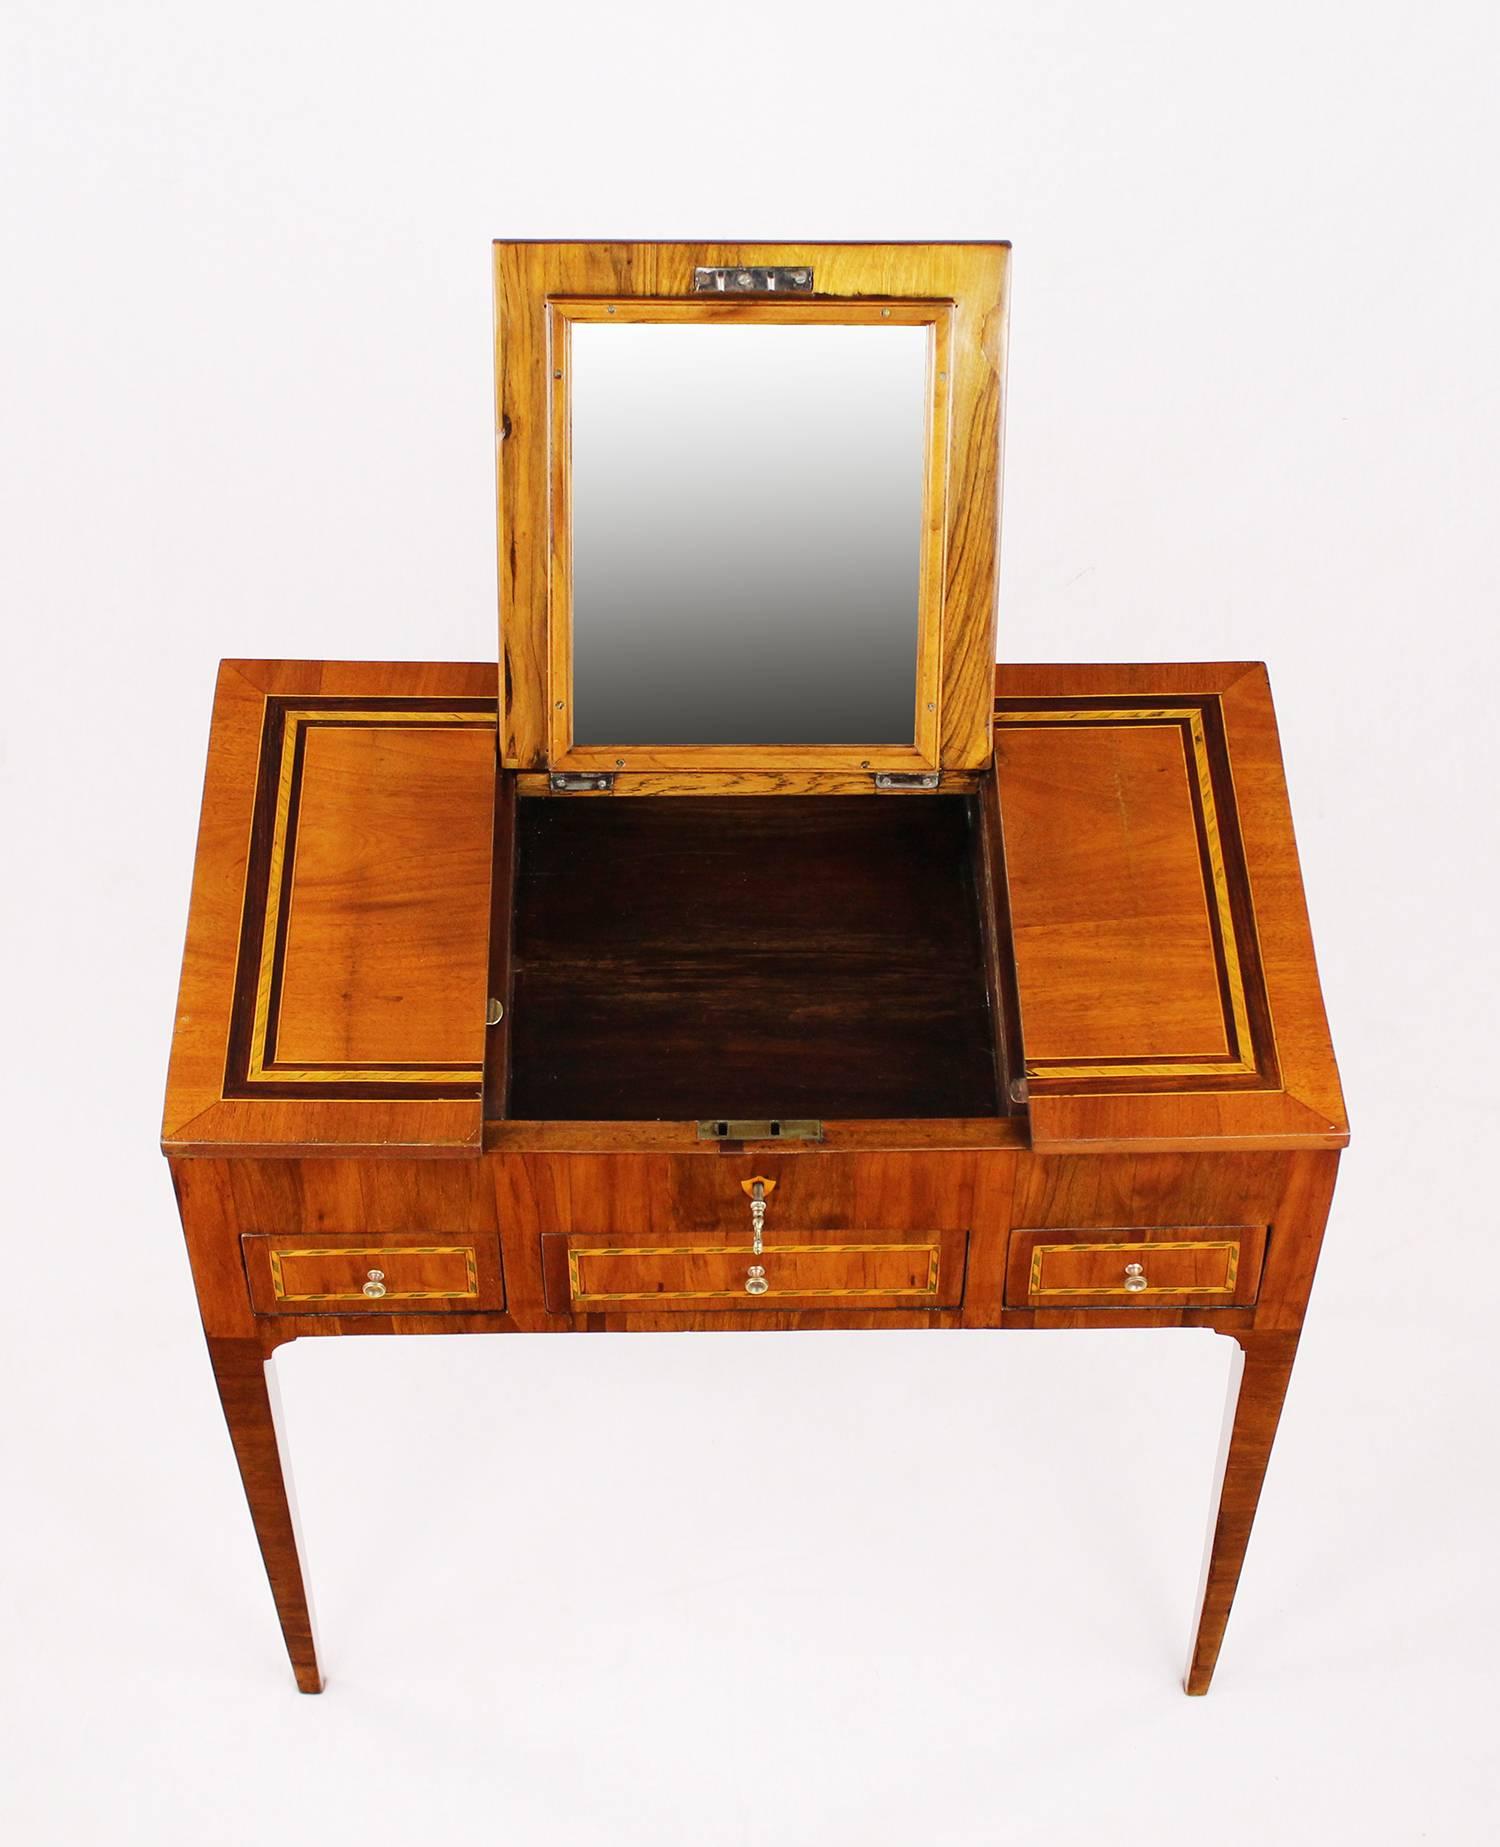 Early 19th Century Dressing Table, Poudreuse, Mahogany Veneered, Marquetry Works (Poliert)